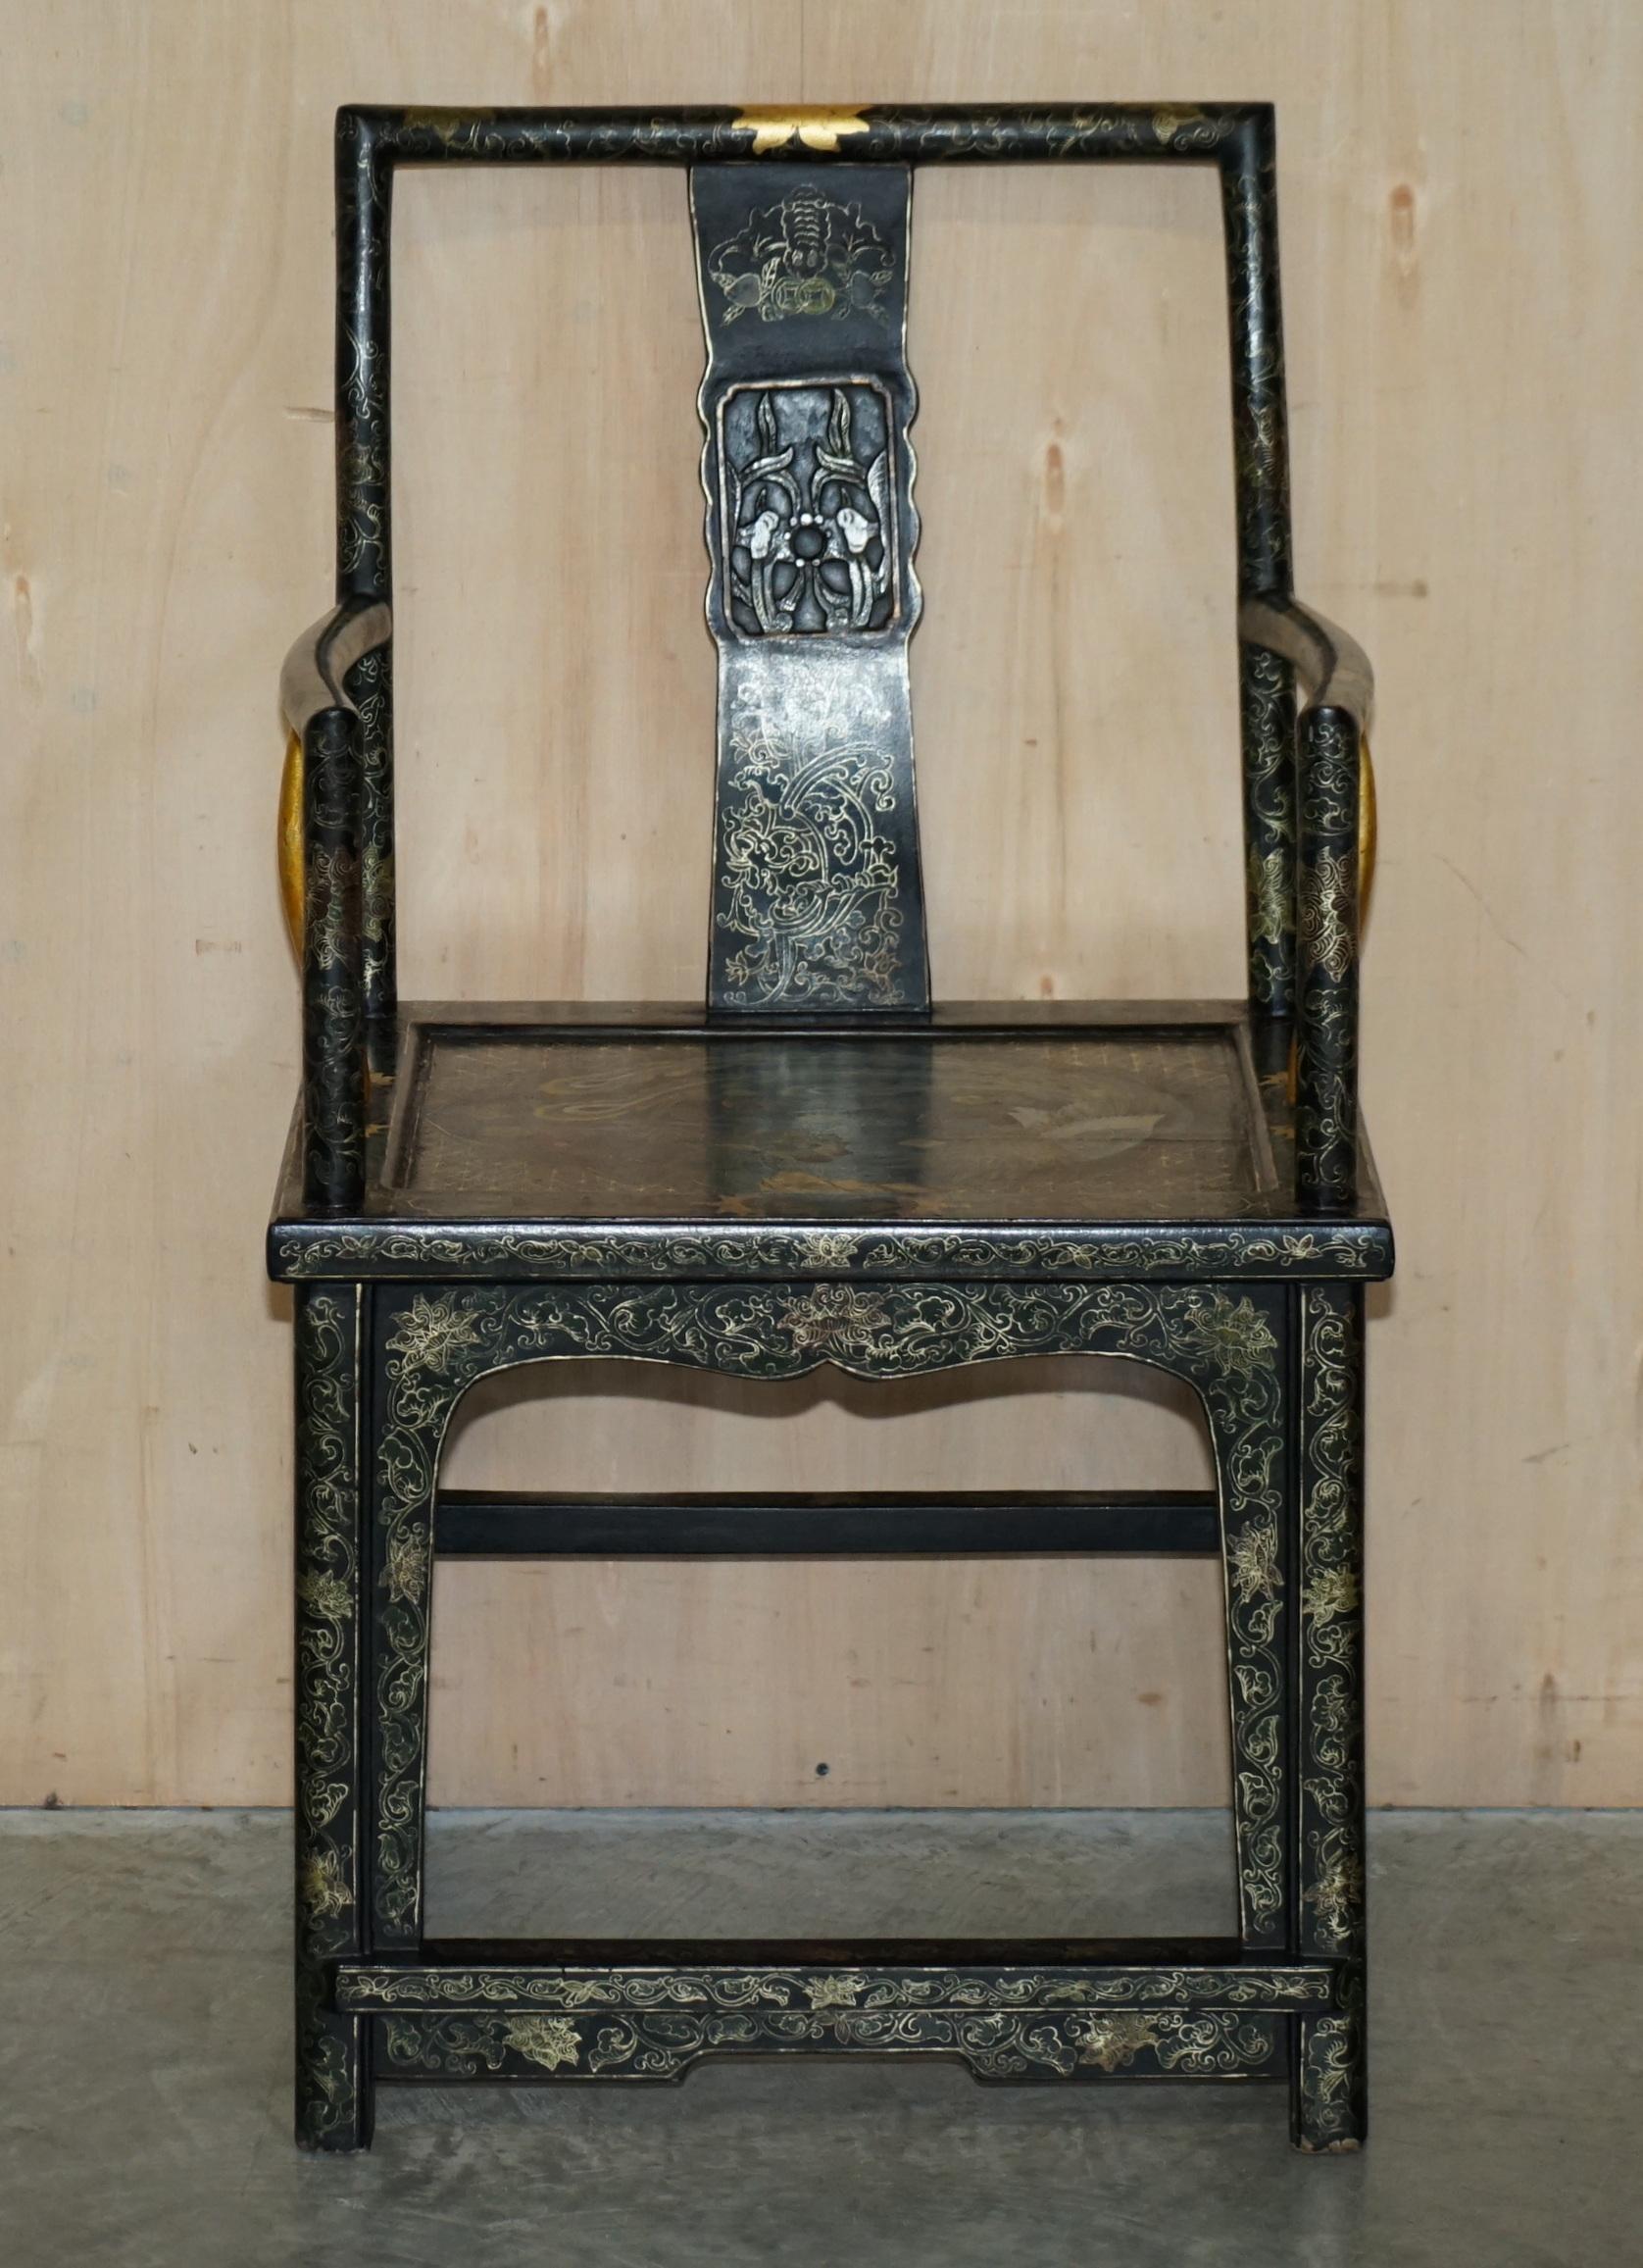 We are delighted to offer for sale this stunning highly decorative Chinese Export circa 1900-1920 hand painted and lacquered Ming style armchair.

I have three of these chairs in total, this one is with gold detailing to the arms and then I have